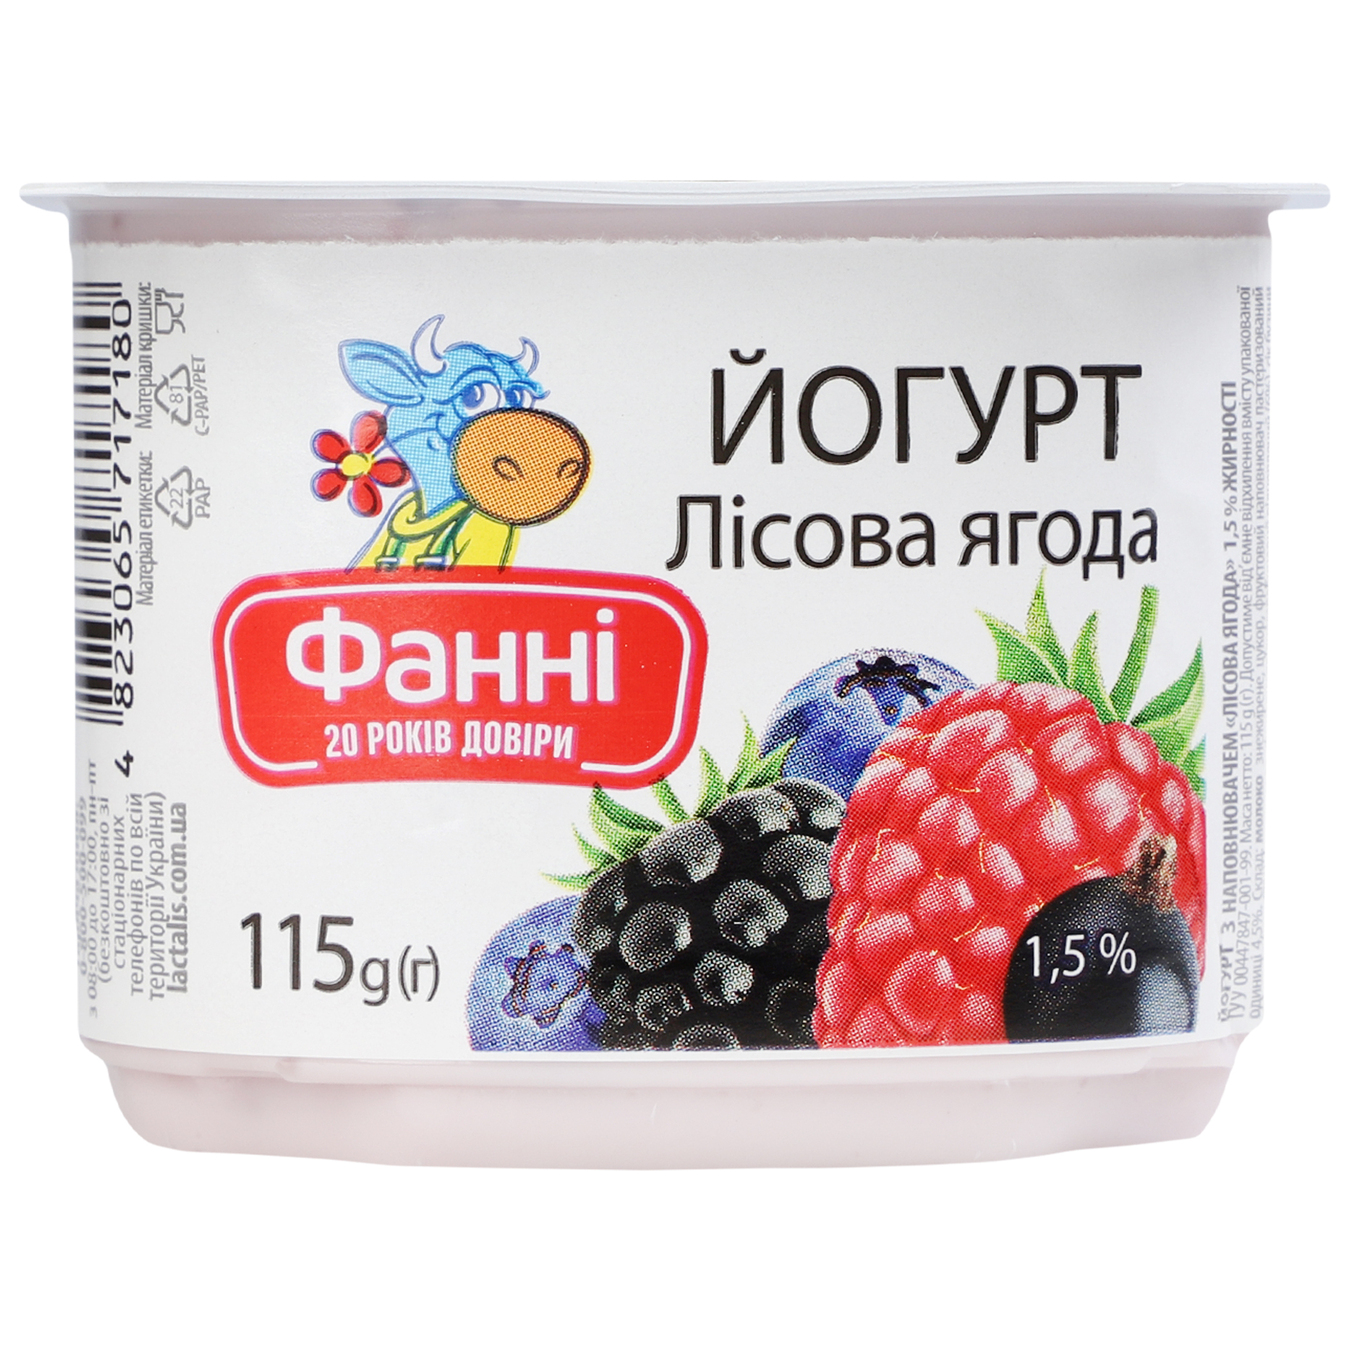 Fanny yogurt with forest berry filling cup 1.5% 115g